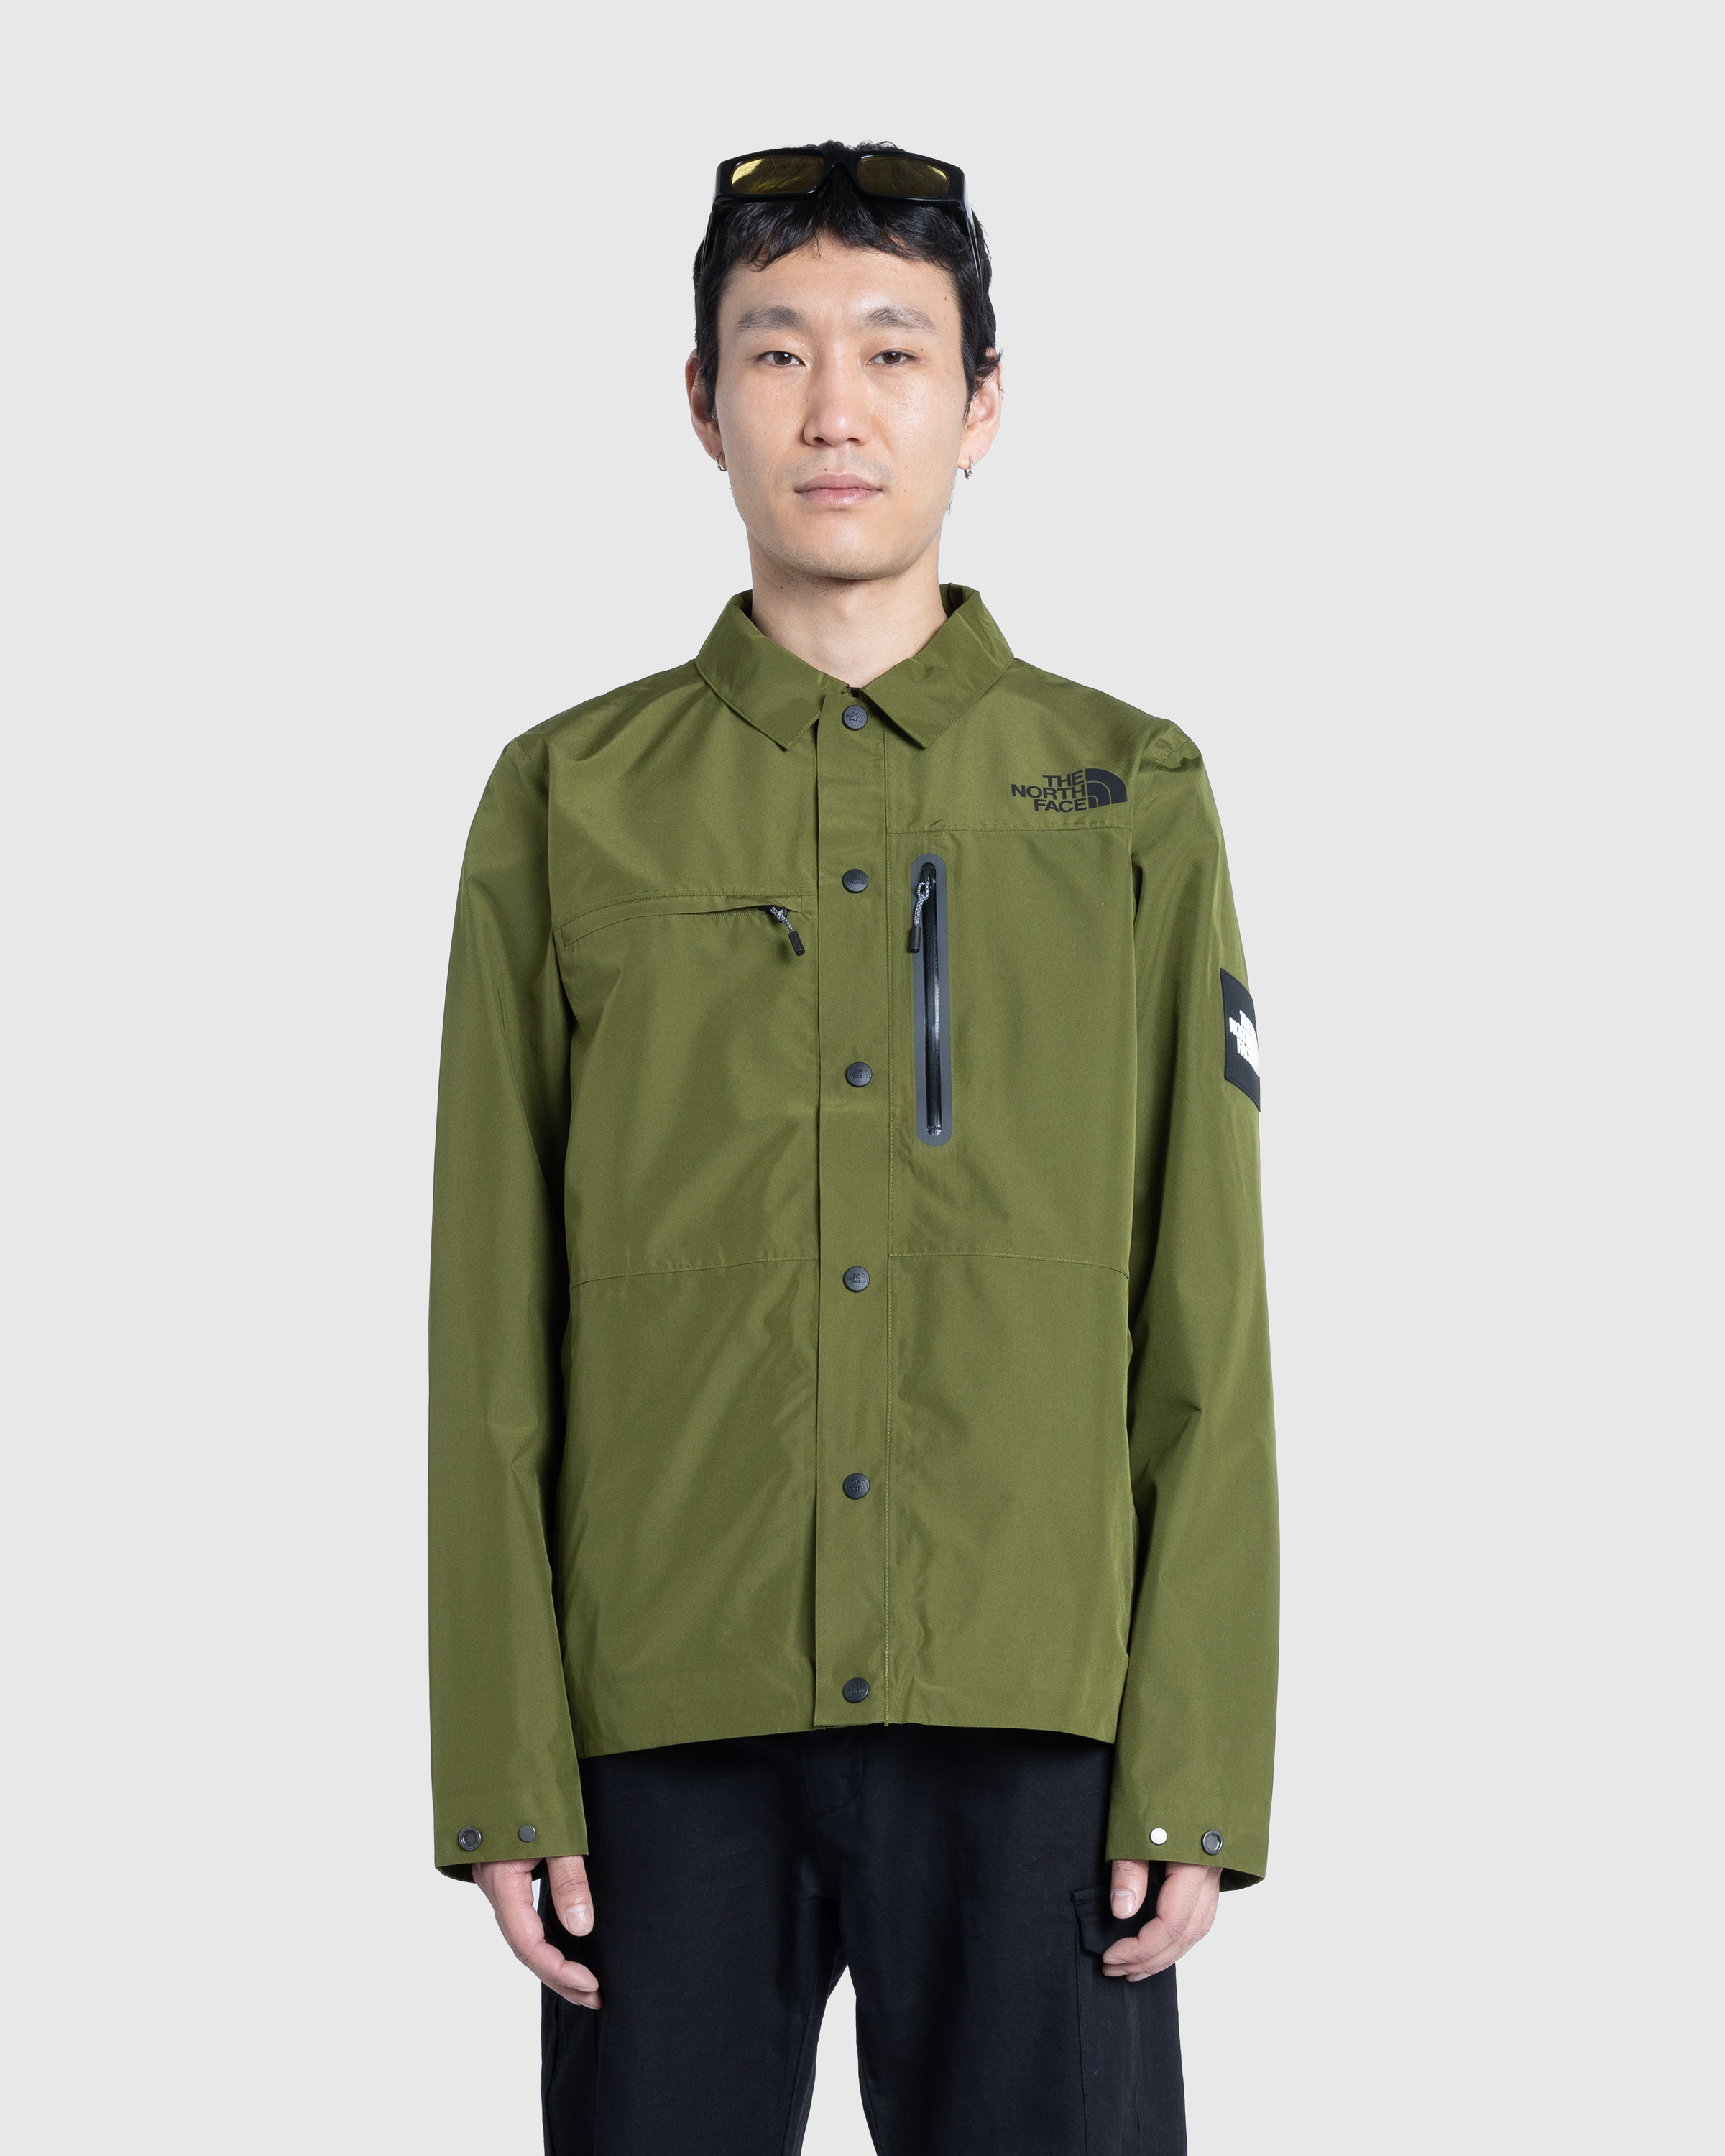 The North Face – Amos Tech Overshirt Forest Olive - Overshirt - Green - Image 2